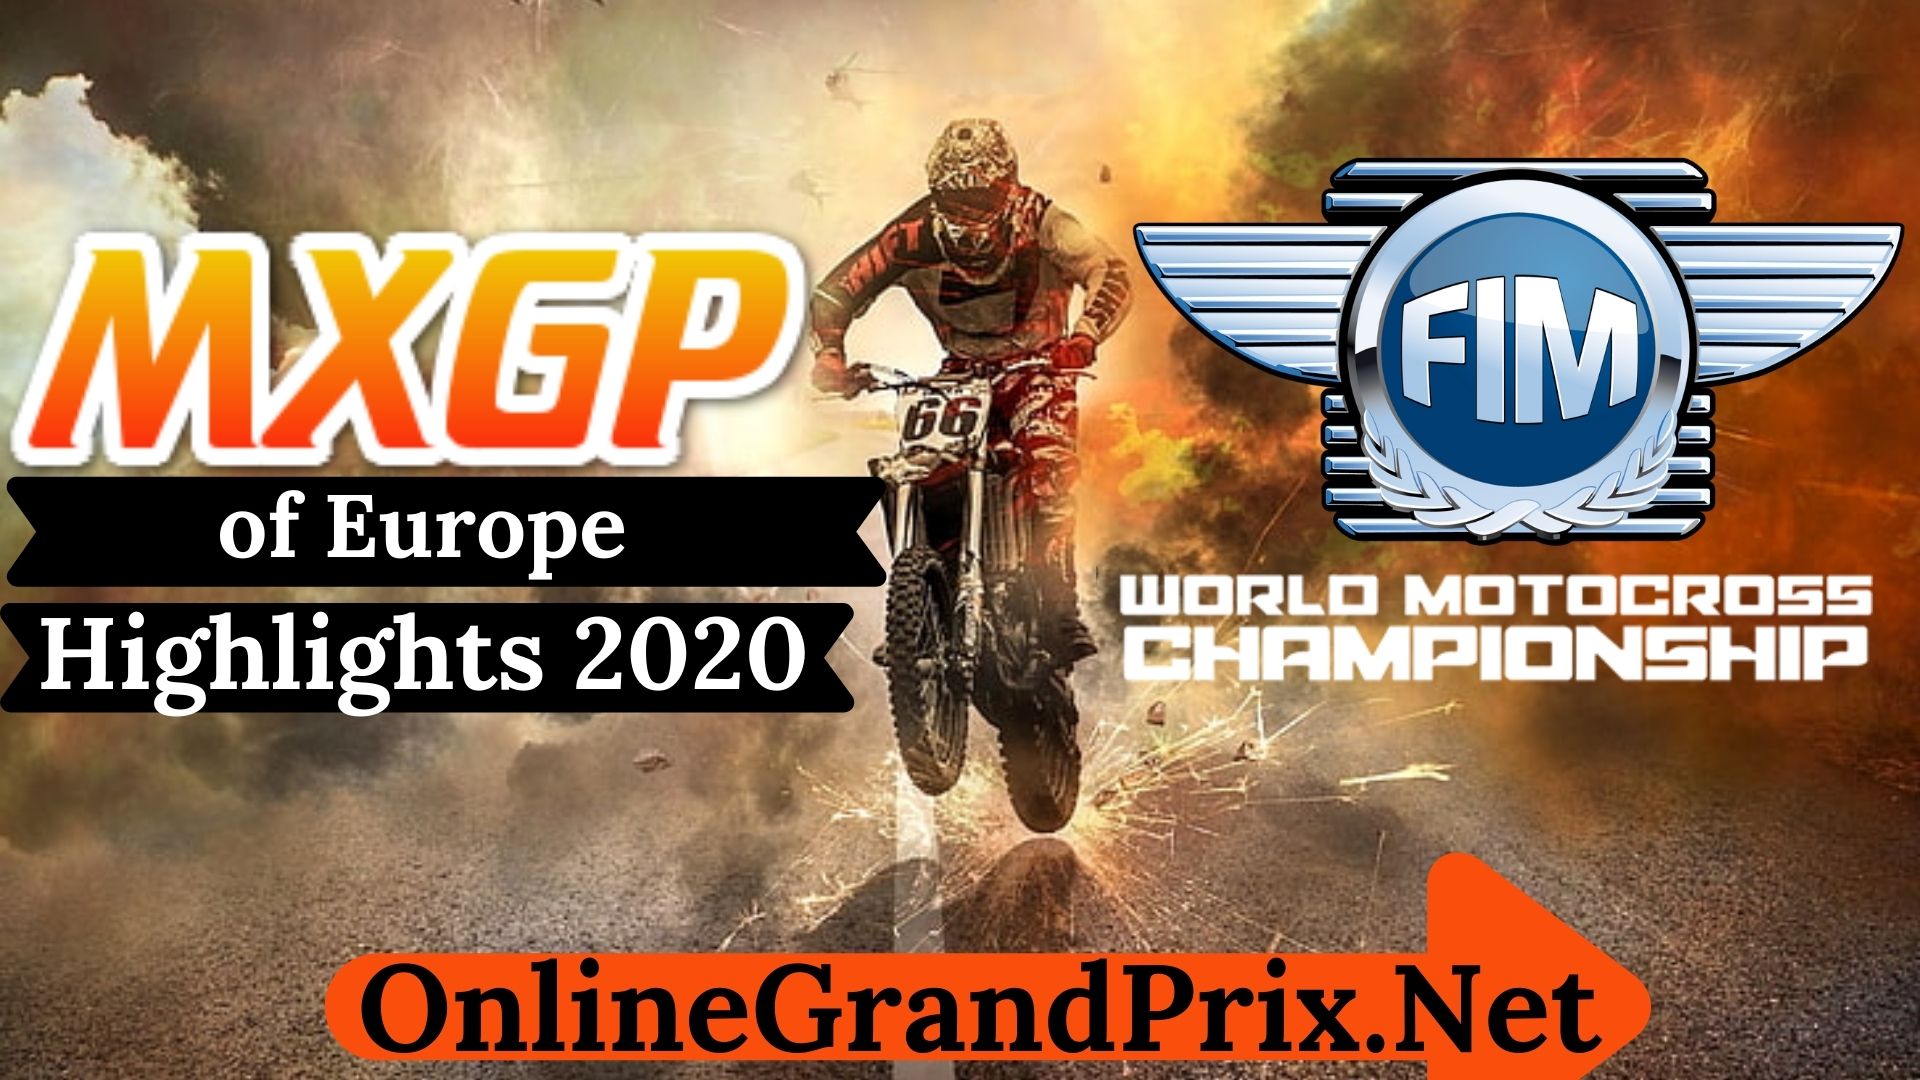 MXGP of Europe Highlights 2020